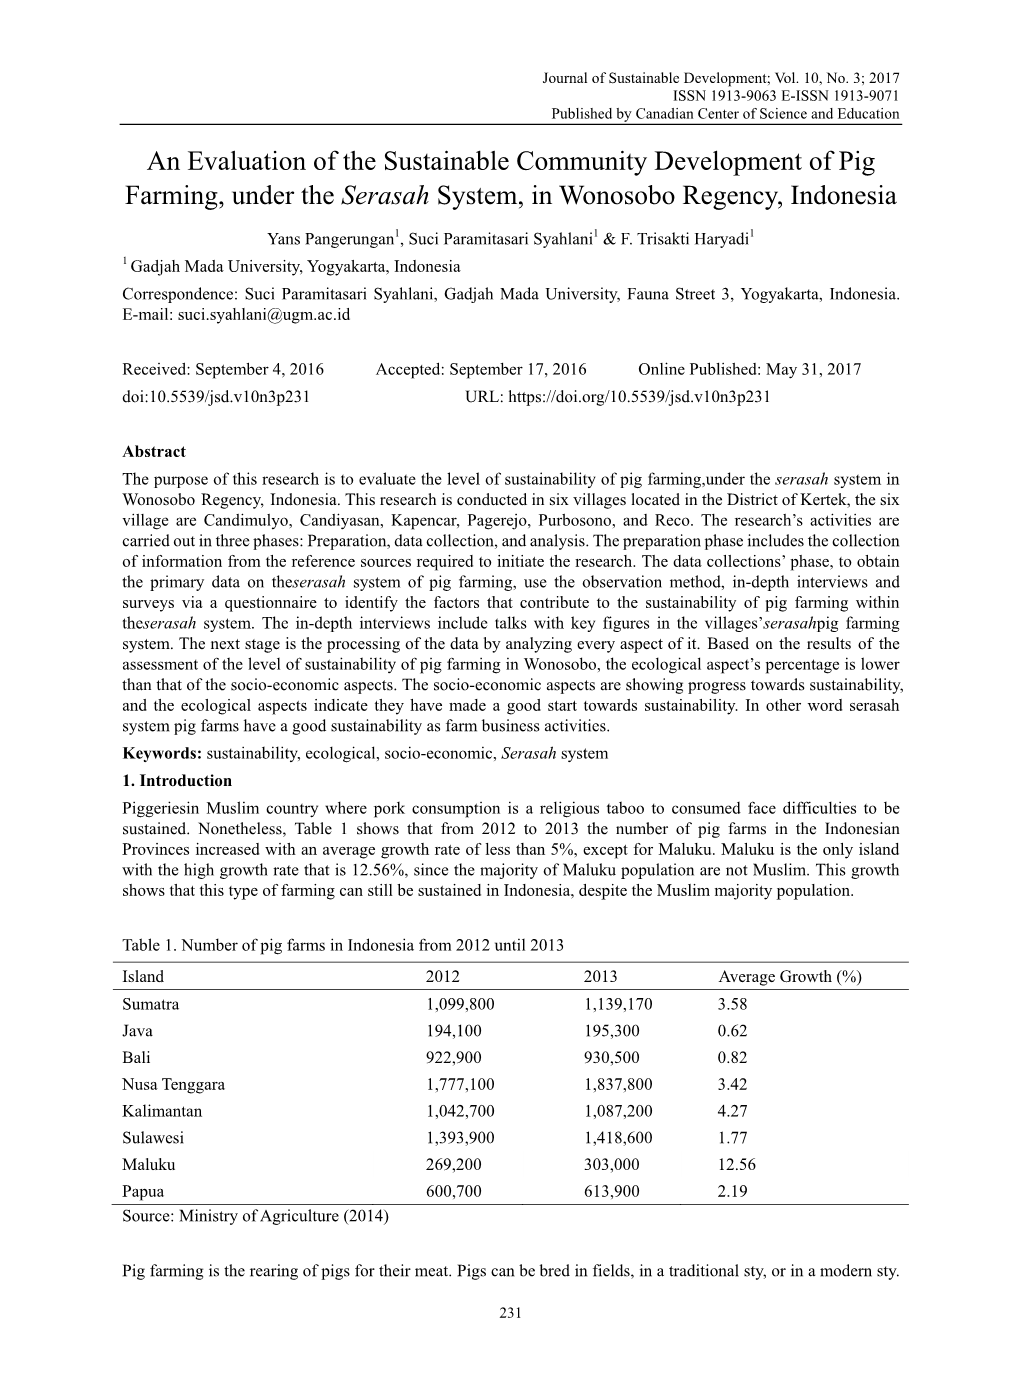 An Evaluation of the Sustainable Community Development of Pig Farming, Under the Serasah System, in Wonosobo Regency, Indonesia